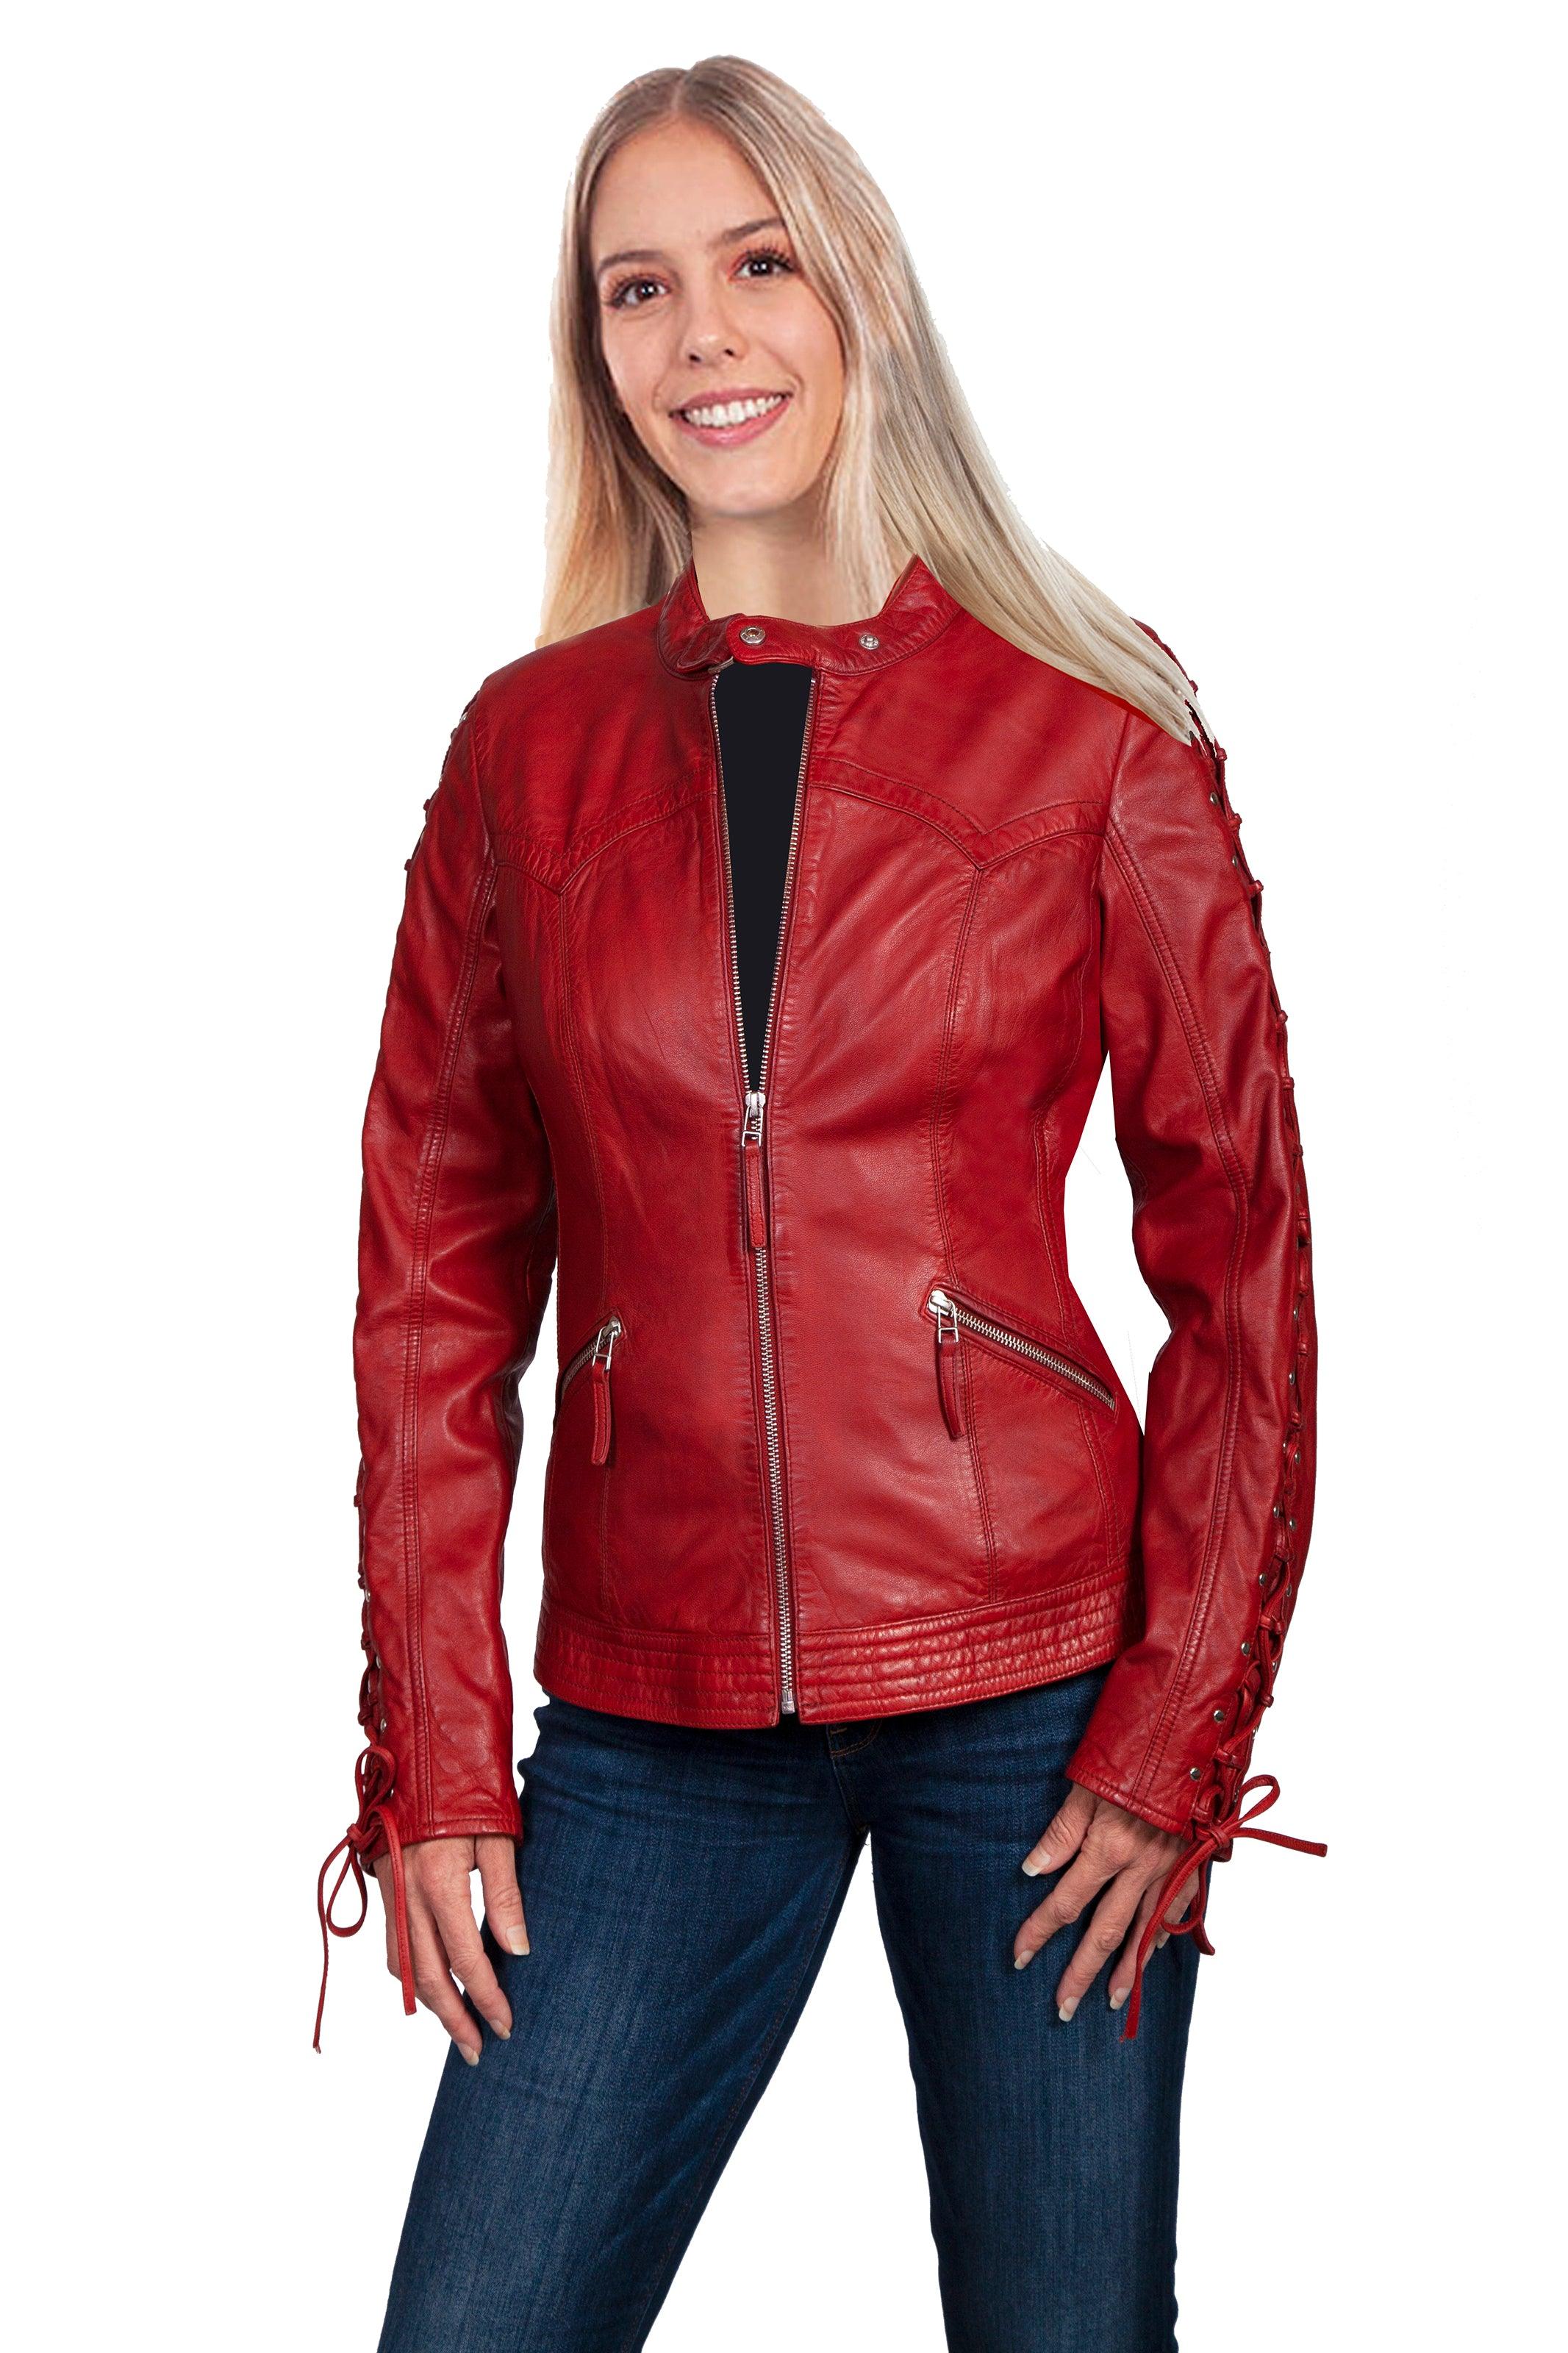 Scully RED LAMB LACED SLEEVE JACKET - Flyclothing LLC